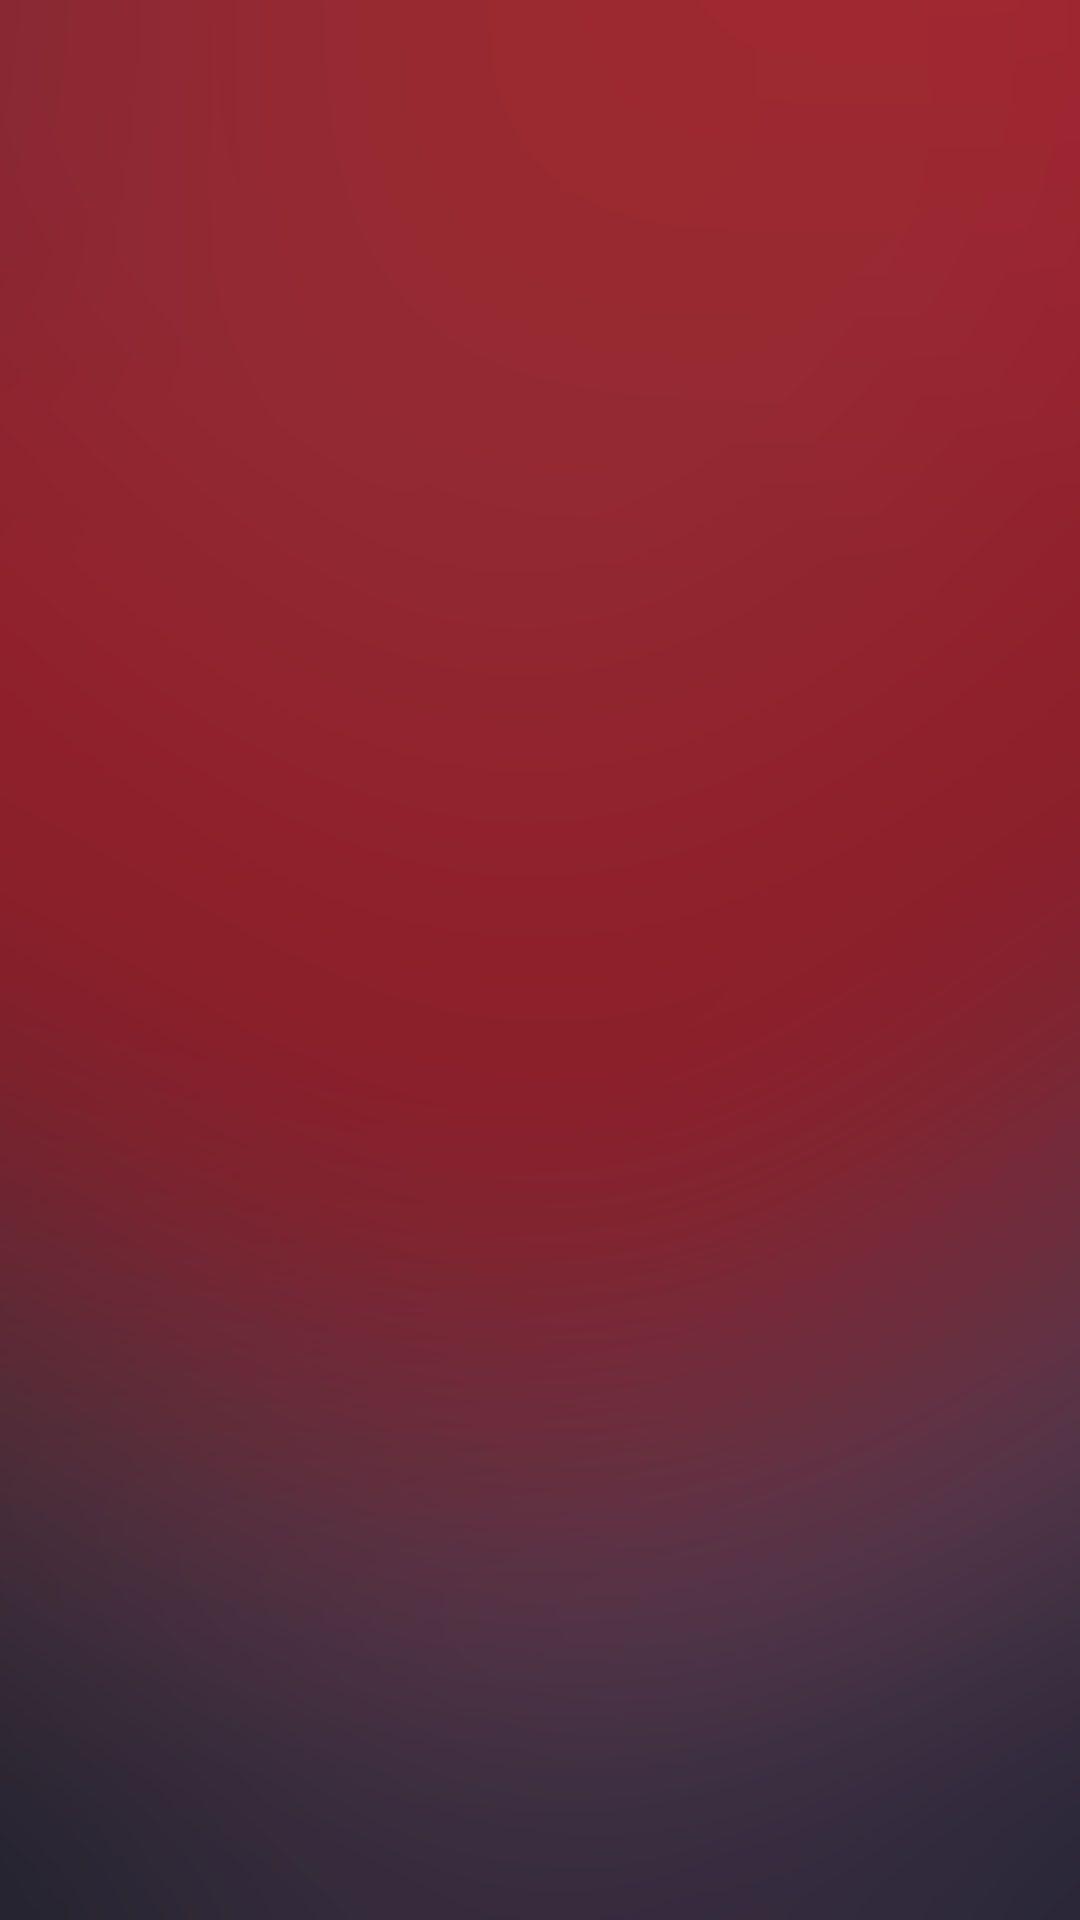 Tải xuống miễn phí 1080x1920 Dark Red Gradient Simple Android Wallpaper